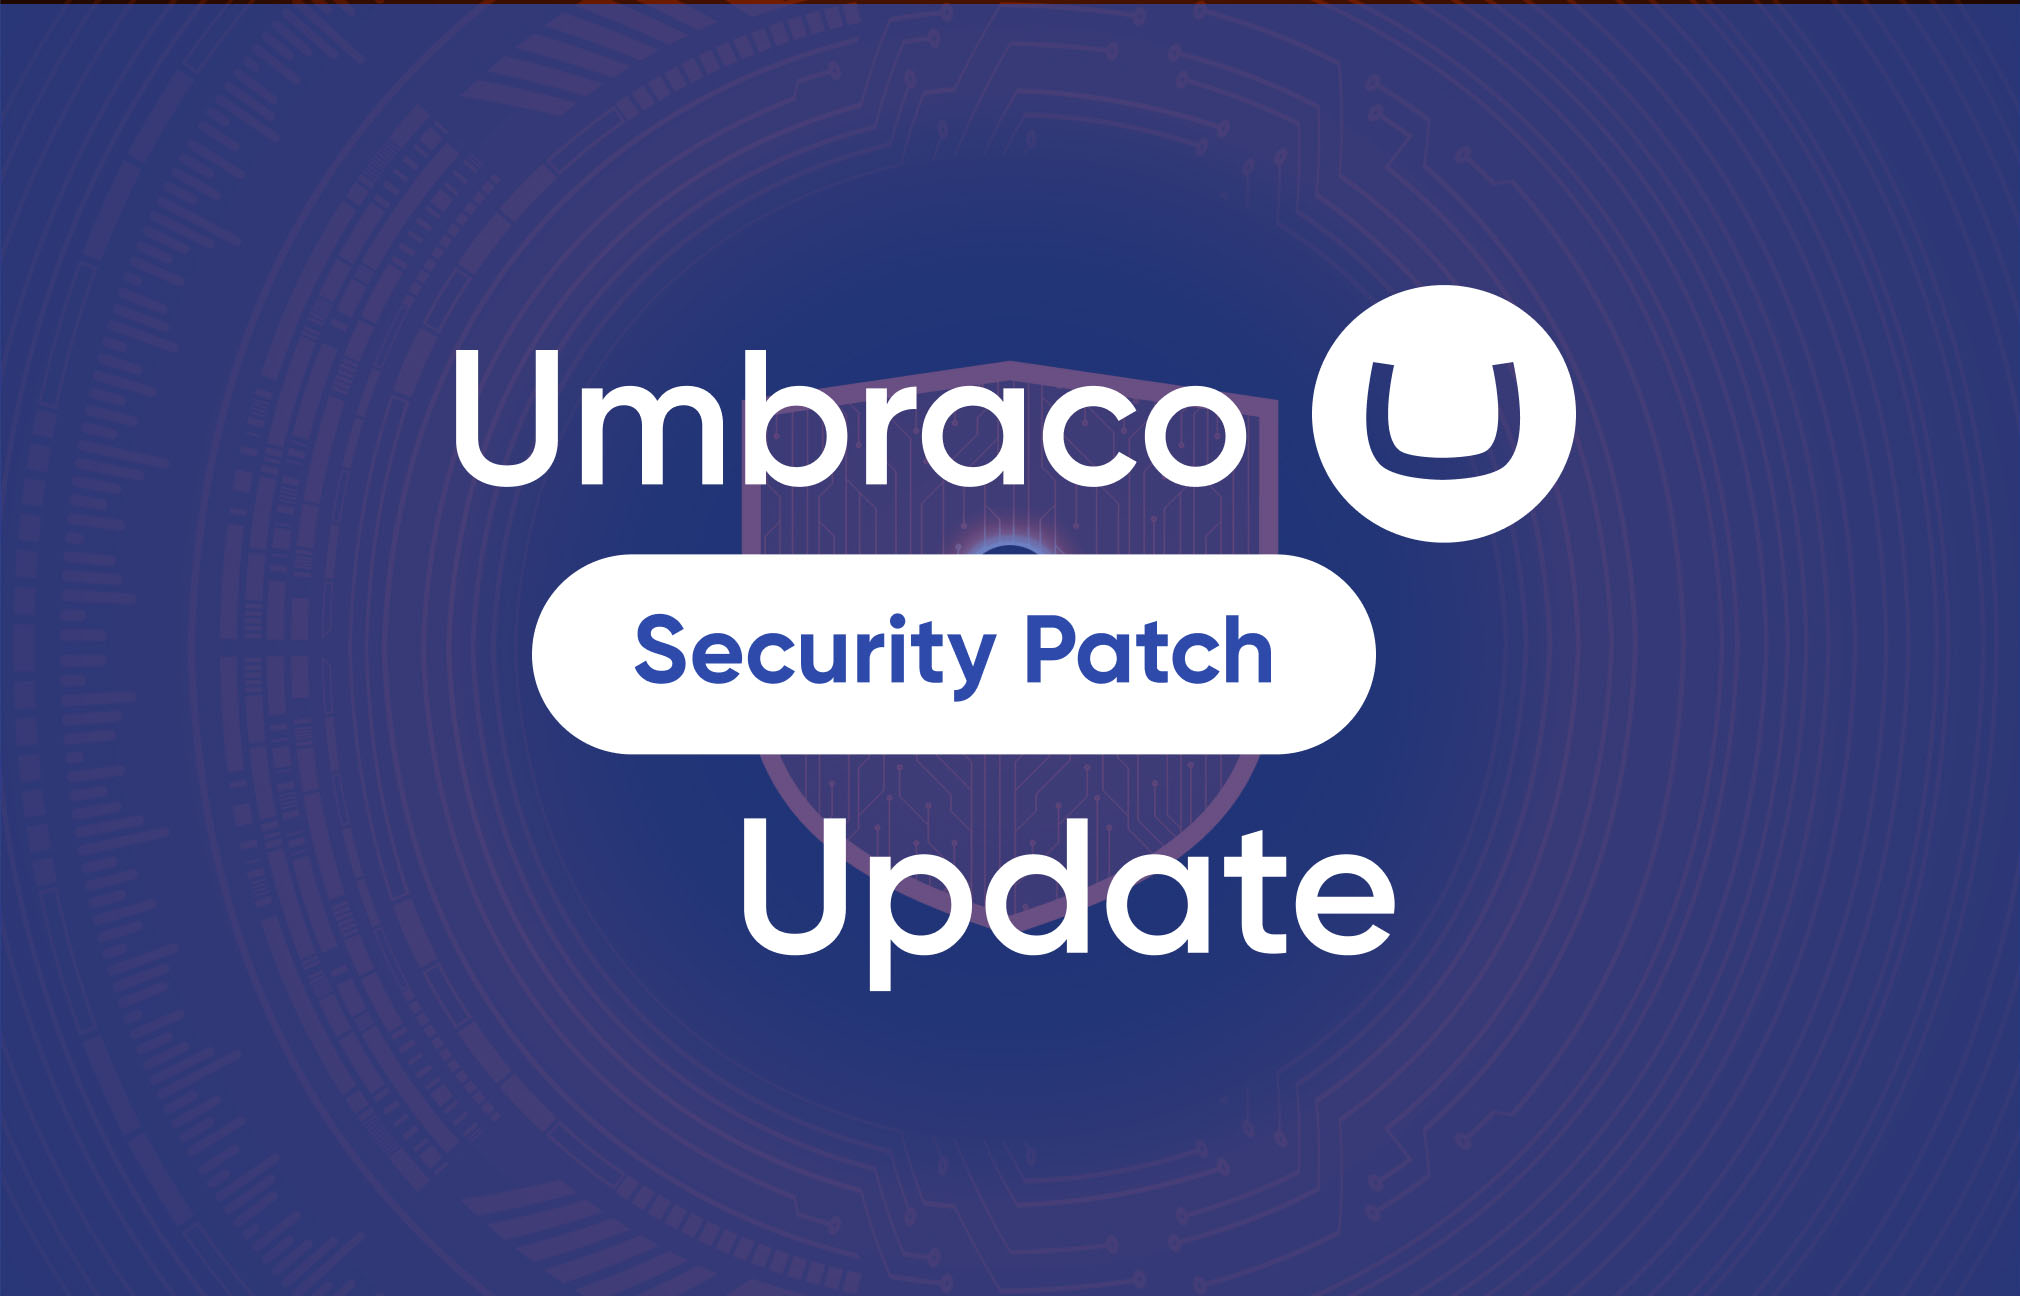 Umbraco’s Recent Security Patch Release Update